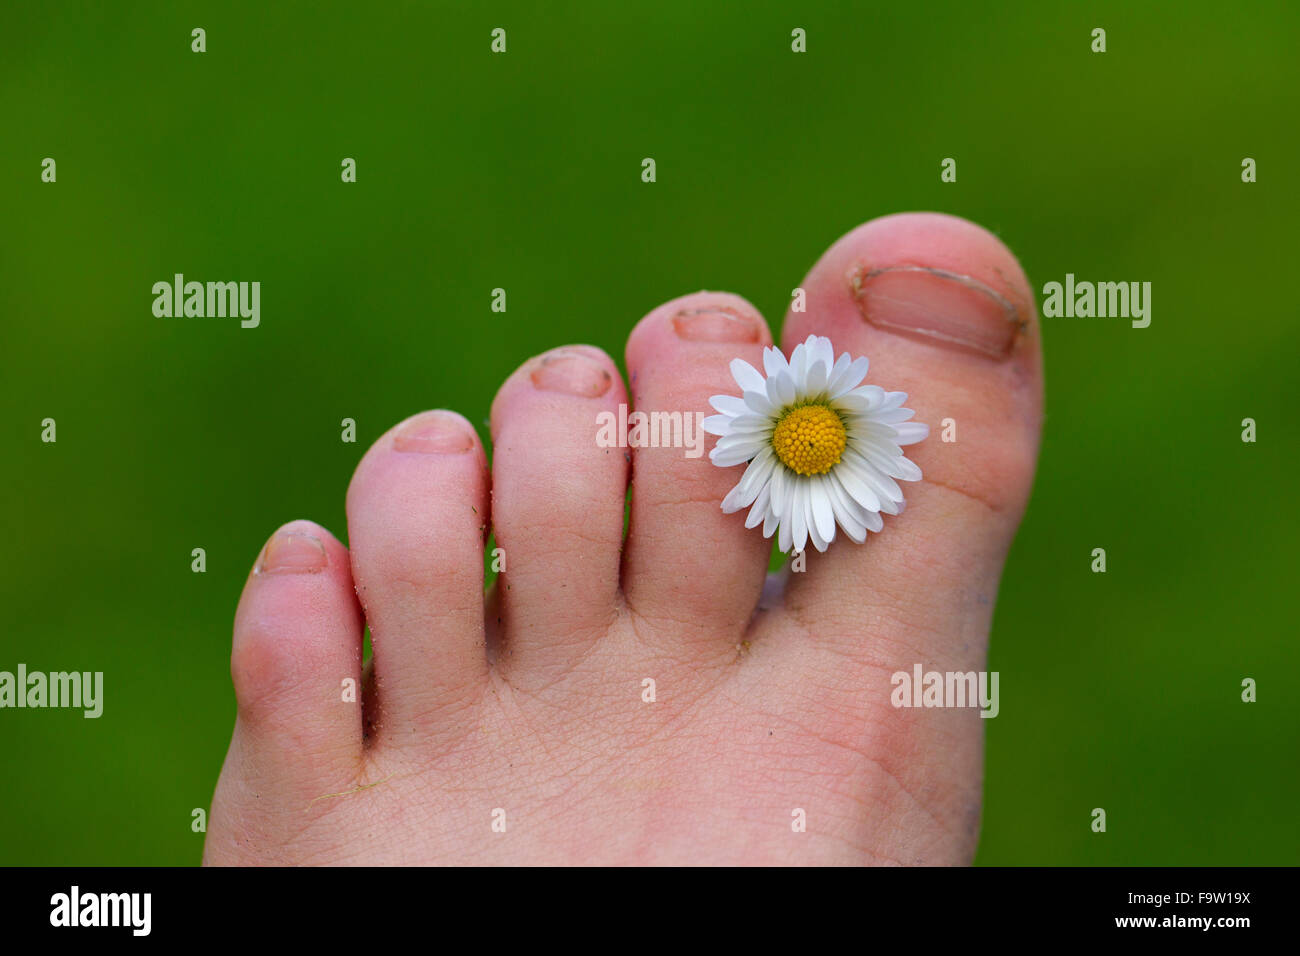 Common daisy / lawn daisy (Bellis perennis) flower between toes of child's foot Stock Photo